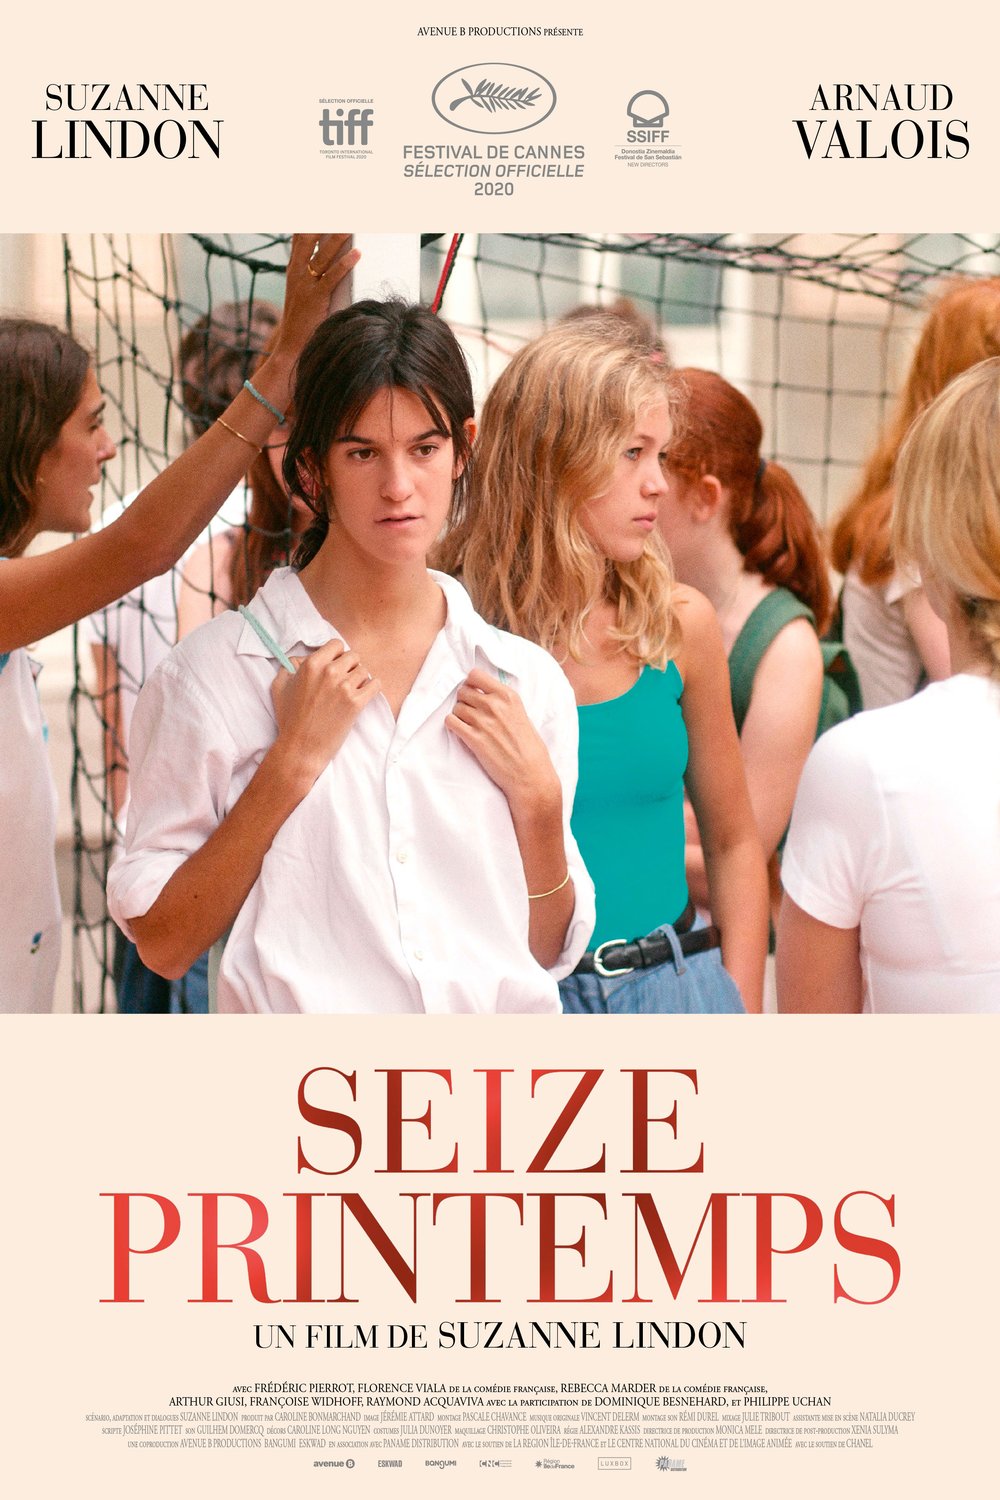 Poster of the movie Seize printemps